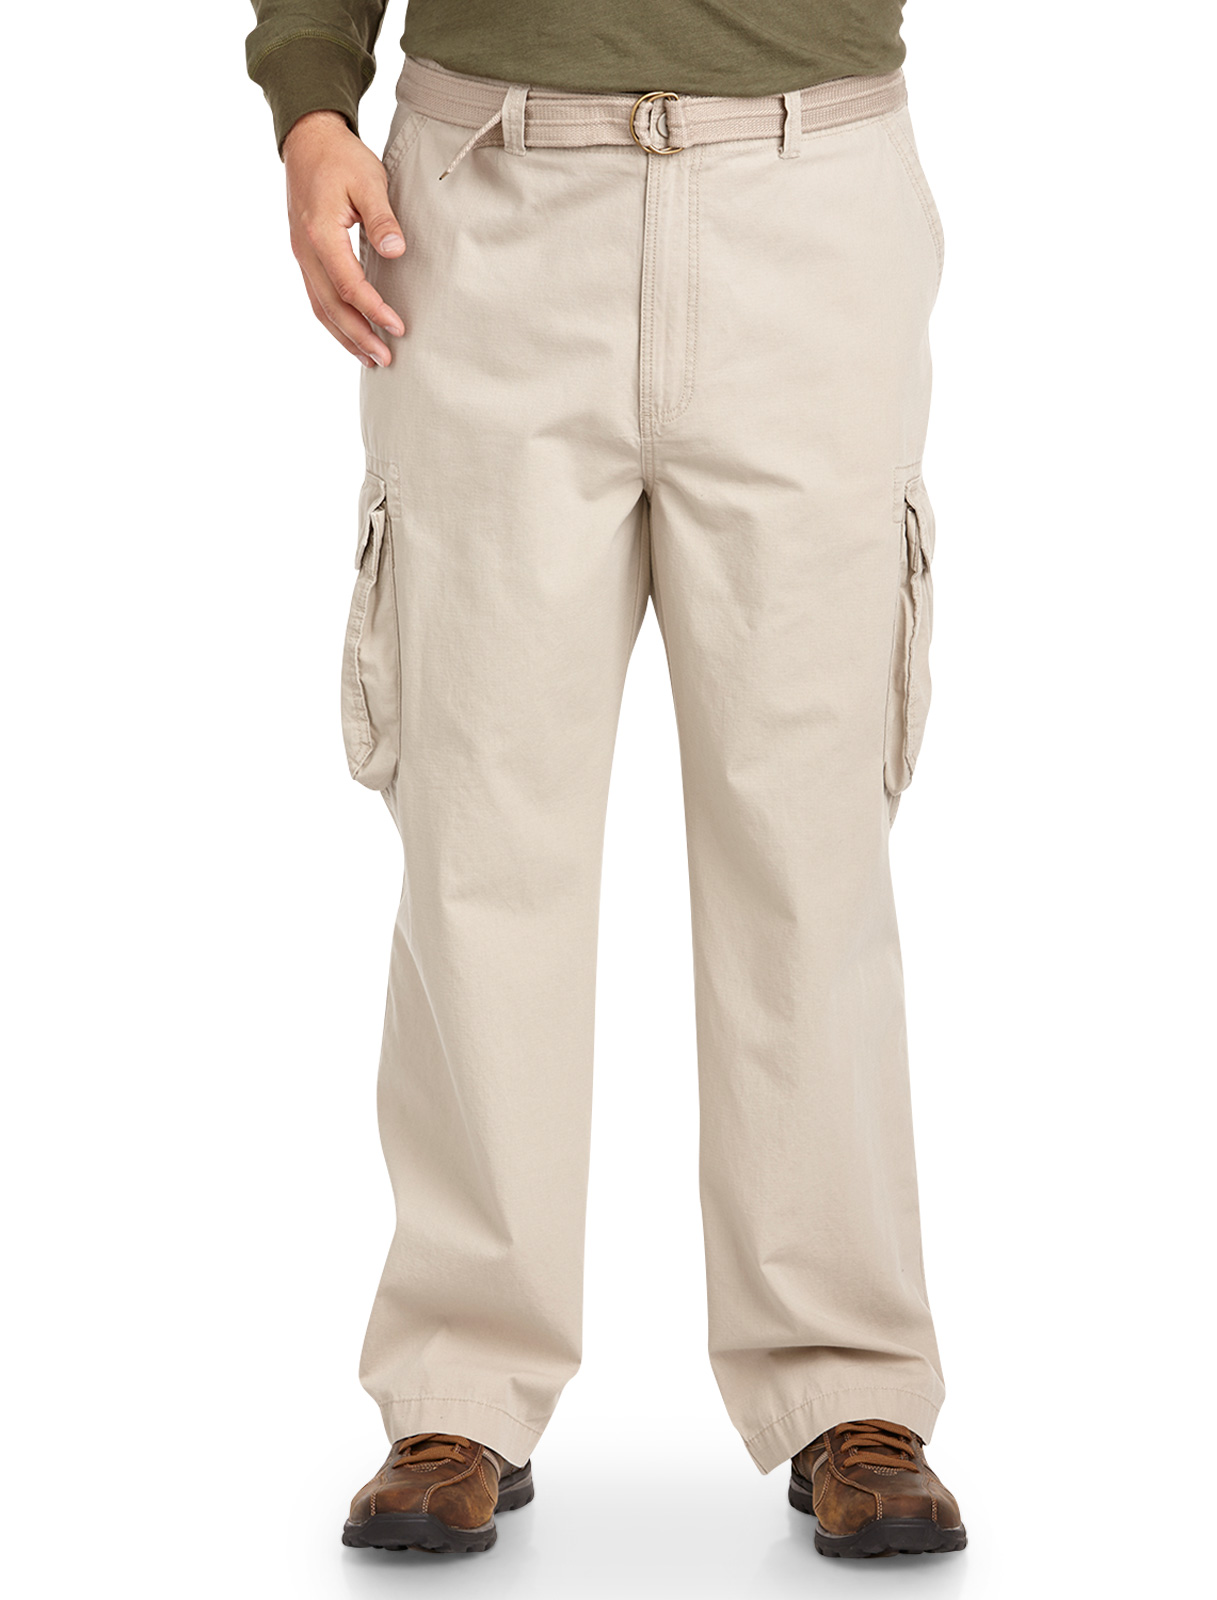 True Nation Men's Big and Tall Belted Ripstop Cargo Pants